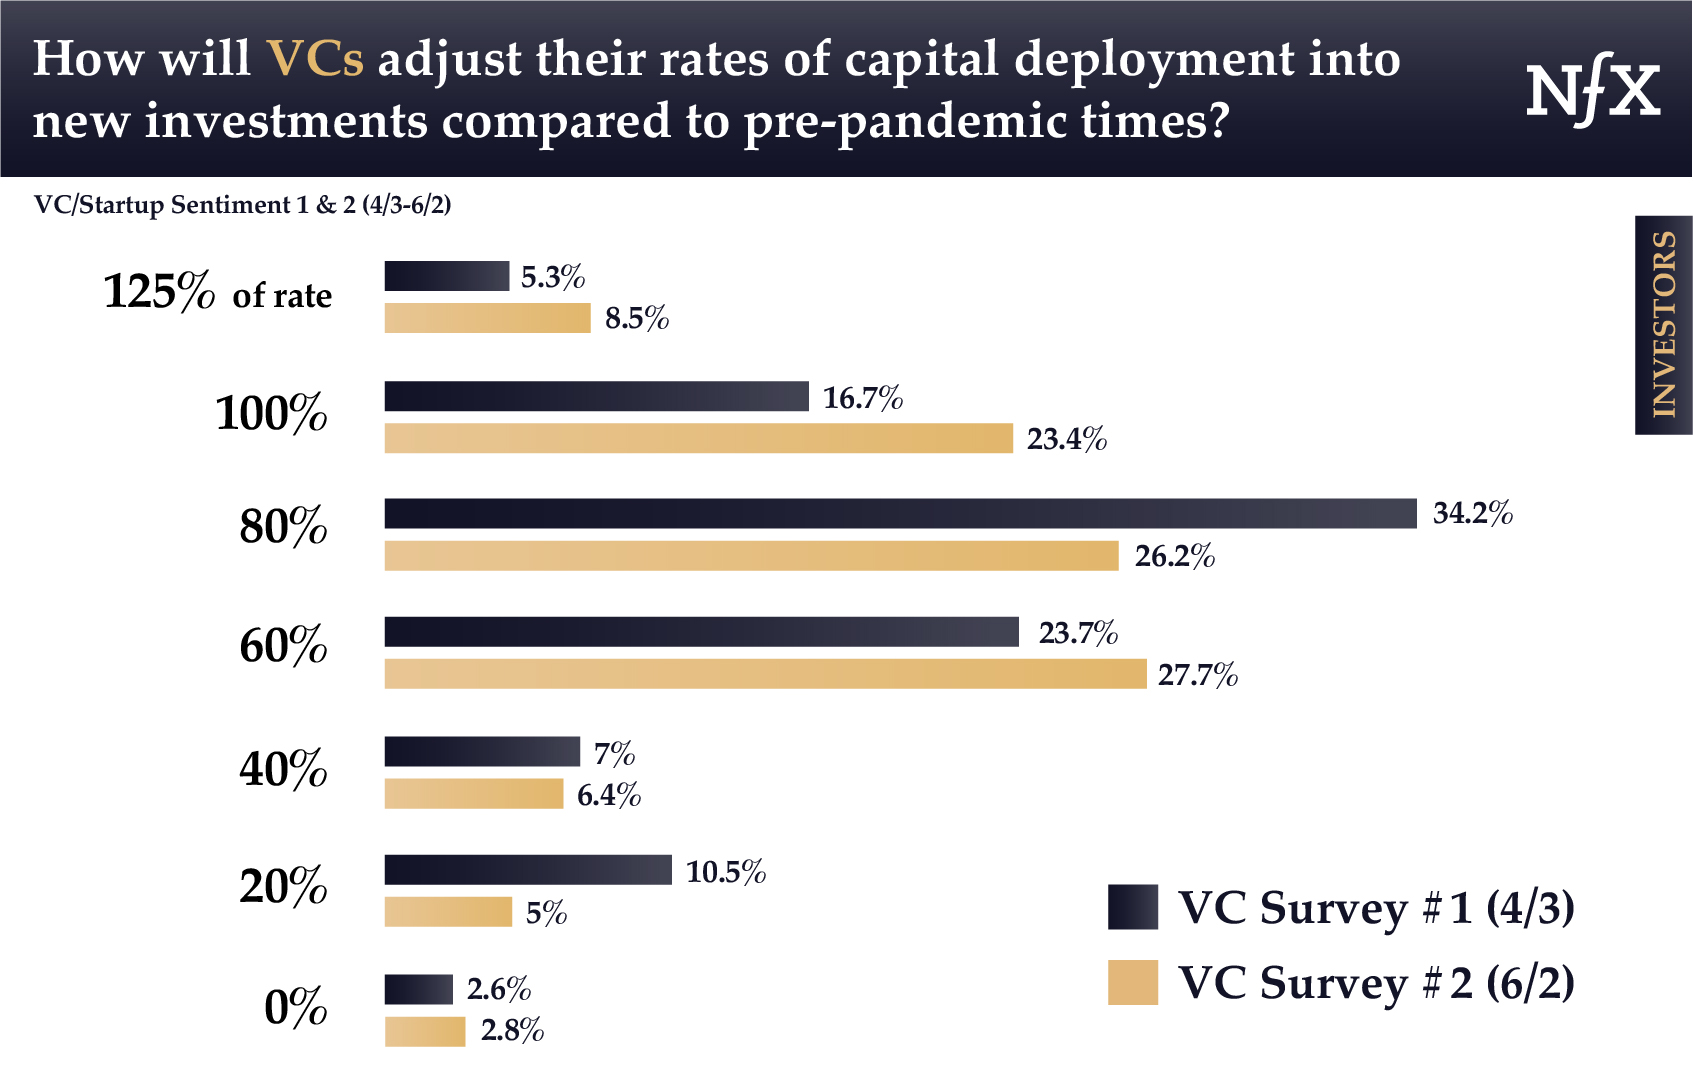 VCs - Rate of Capital Deployment